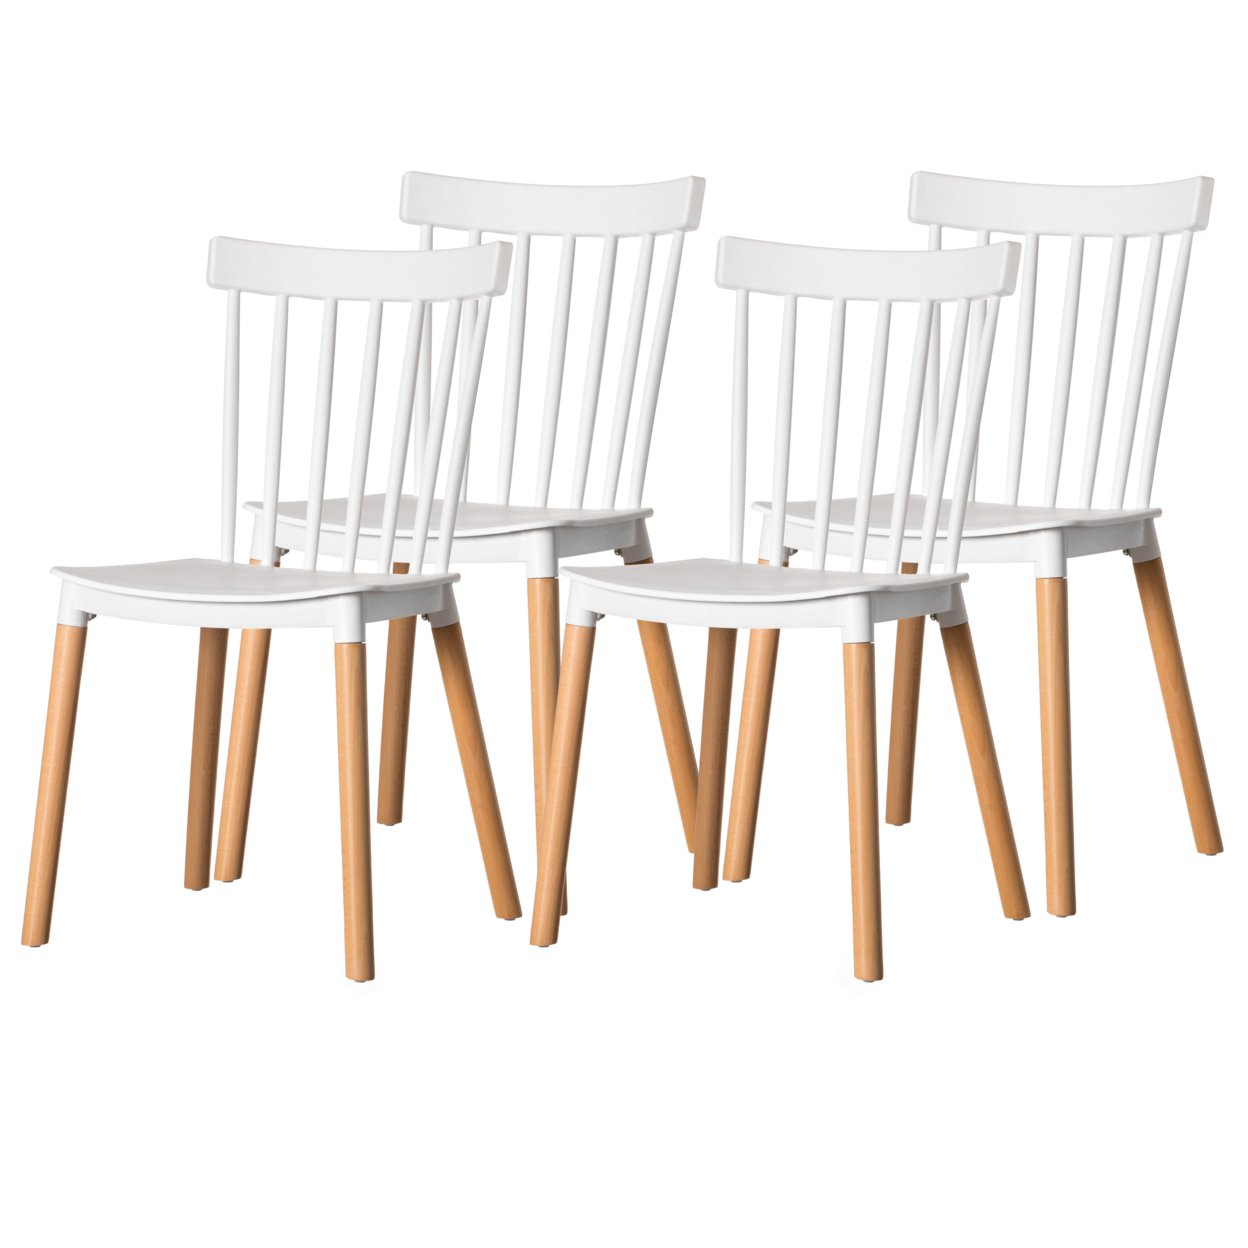 Modern Plastic Dining Chair Windsor Design With Beech Wood Legs - Set Of 4 White